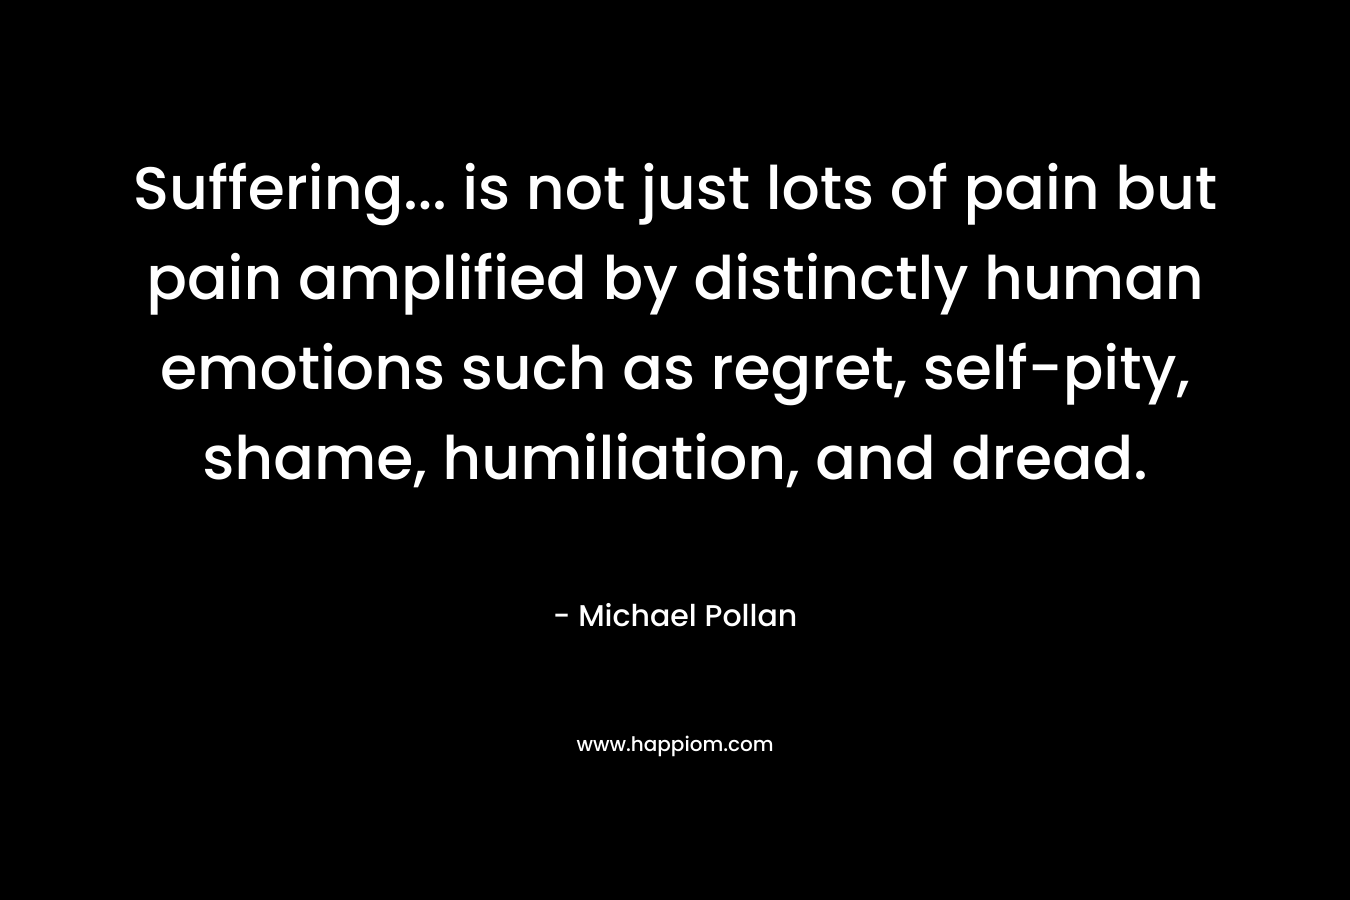 Suffering... is not just lots of pain but pain amplified by distinctly human emotions such as regret, self-pity, shame, humiliation, and dread.